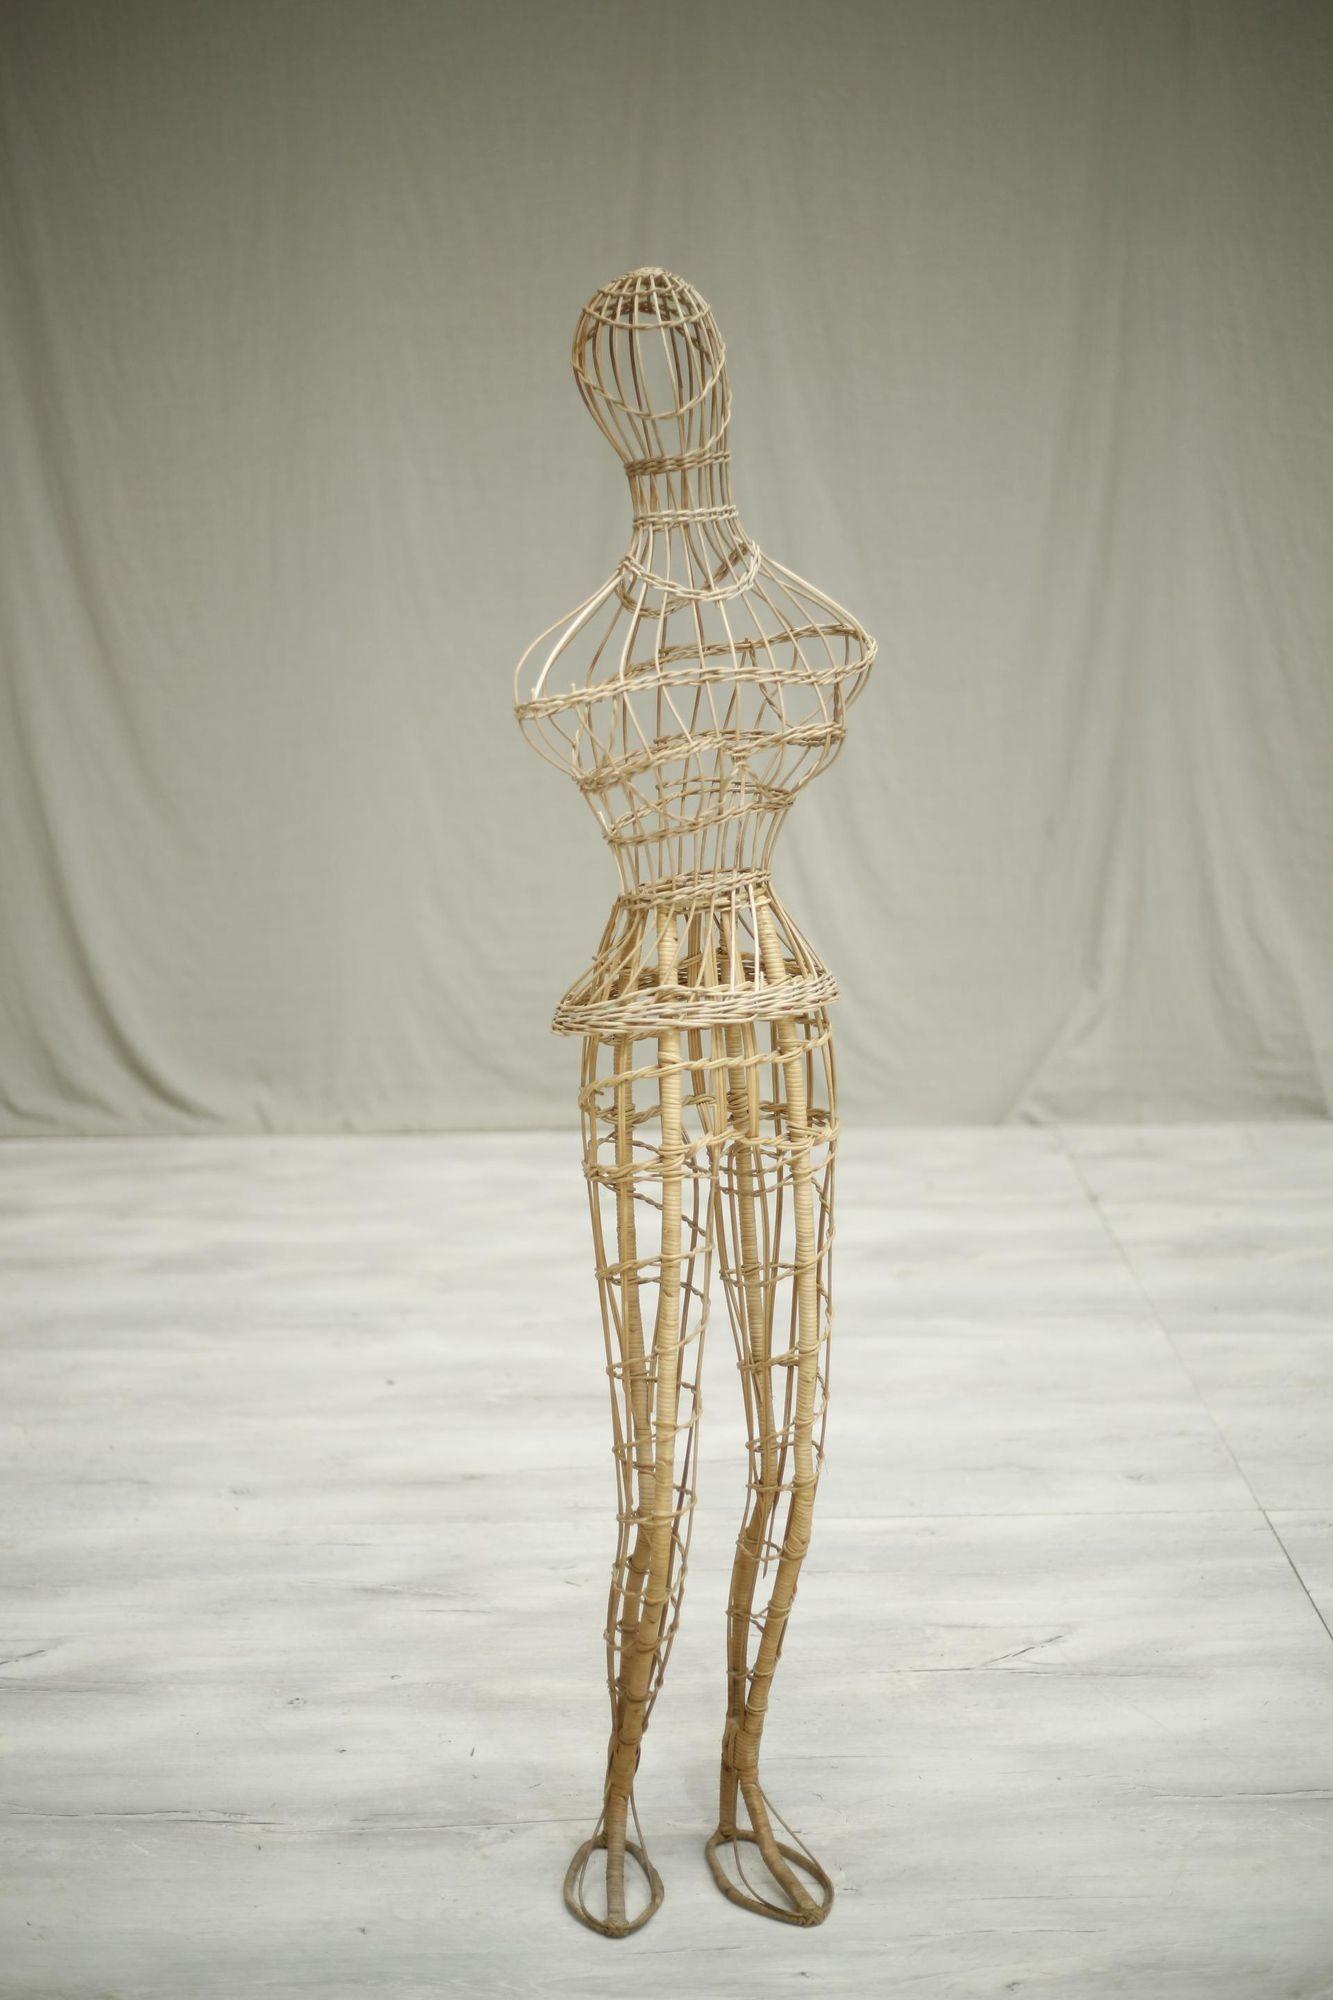 This is a very quirky piece from a Dress makers shop in France. A 1950's mannequin of a female that makes a great curio piece for any interiors. Quirky but beautifully sculptural. The wicker frame is in overall very good condition for its age with